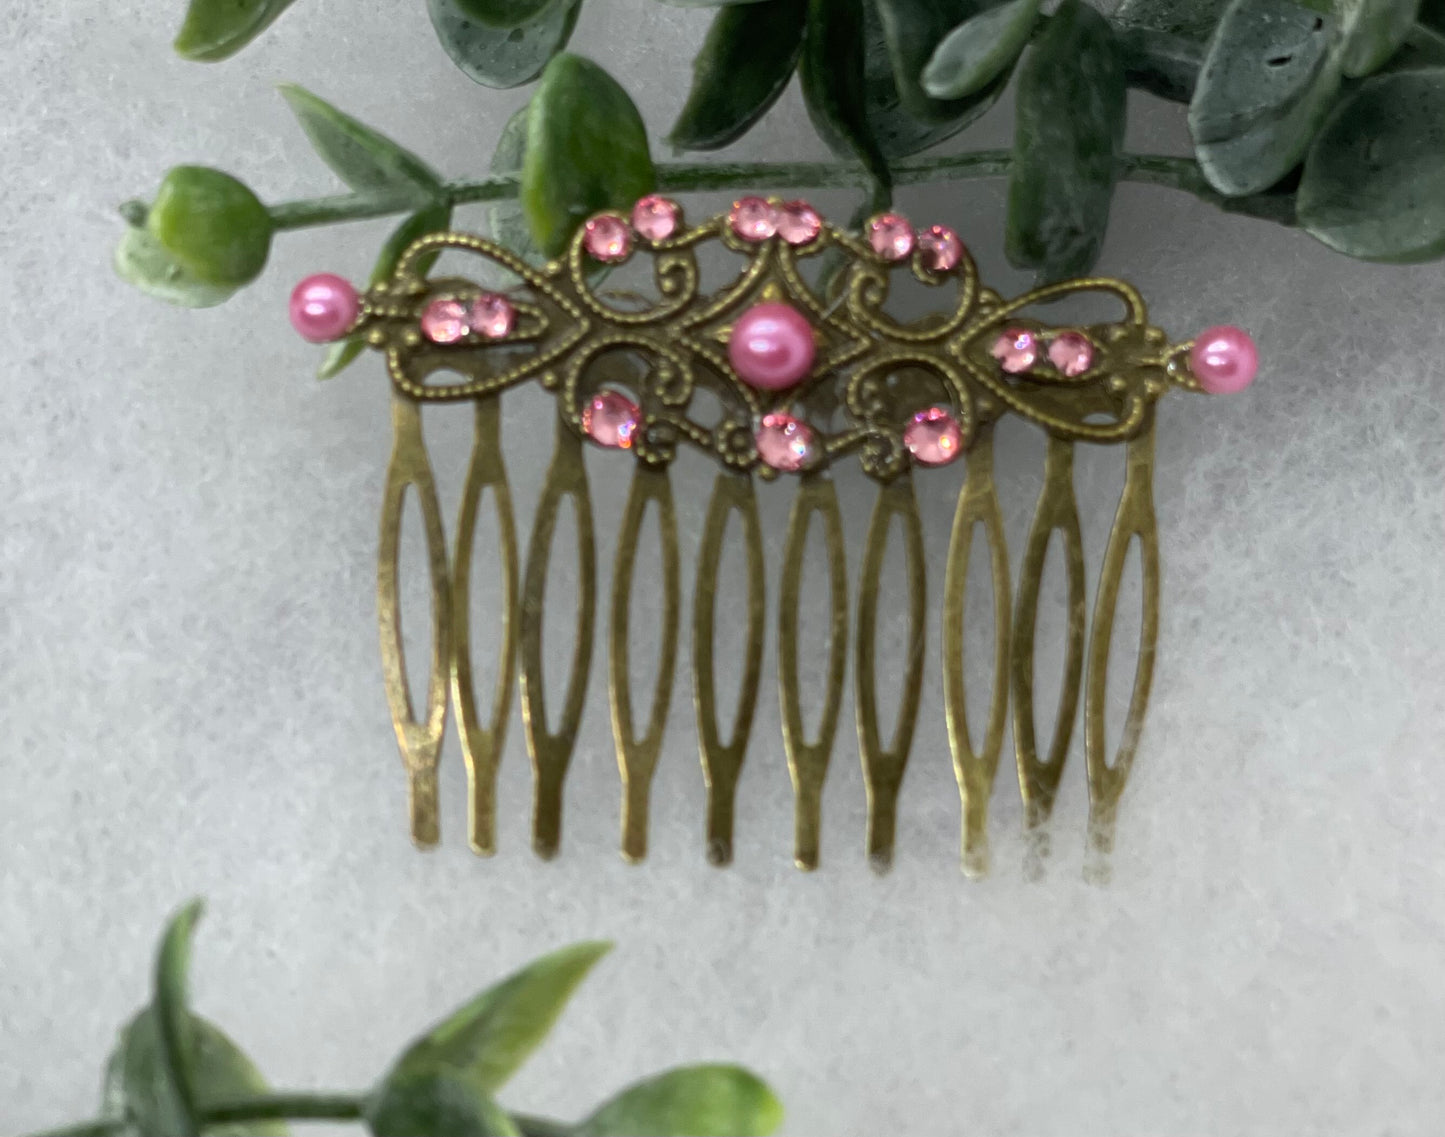 Pink crystal rhinestone pearl vintage style antique  hair accessories gift birthday event formal bridesmaid  2.5” Metal side Comb #153